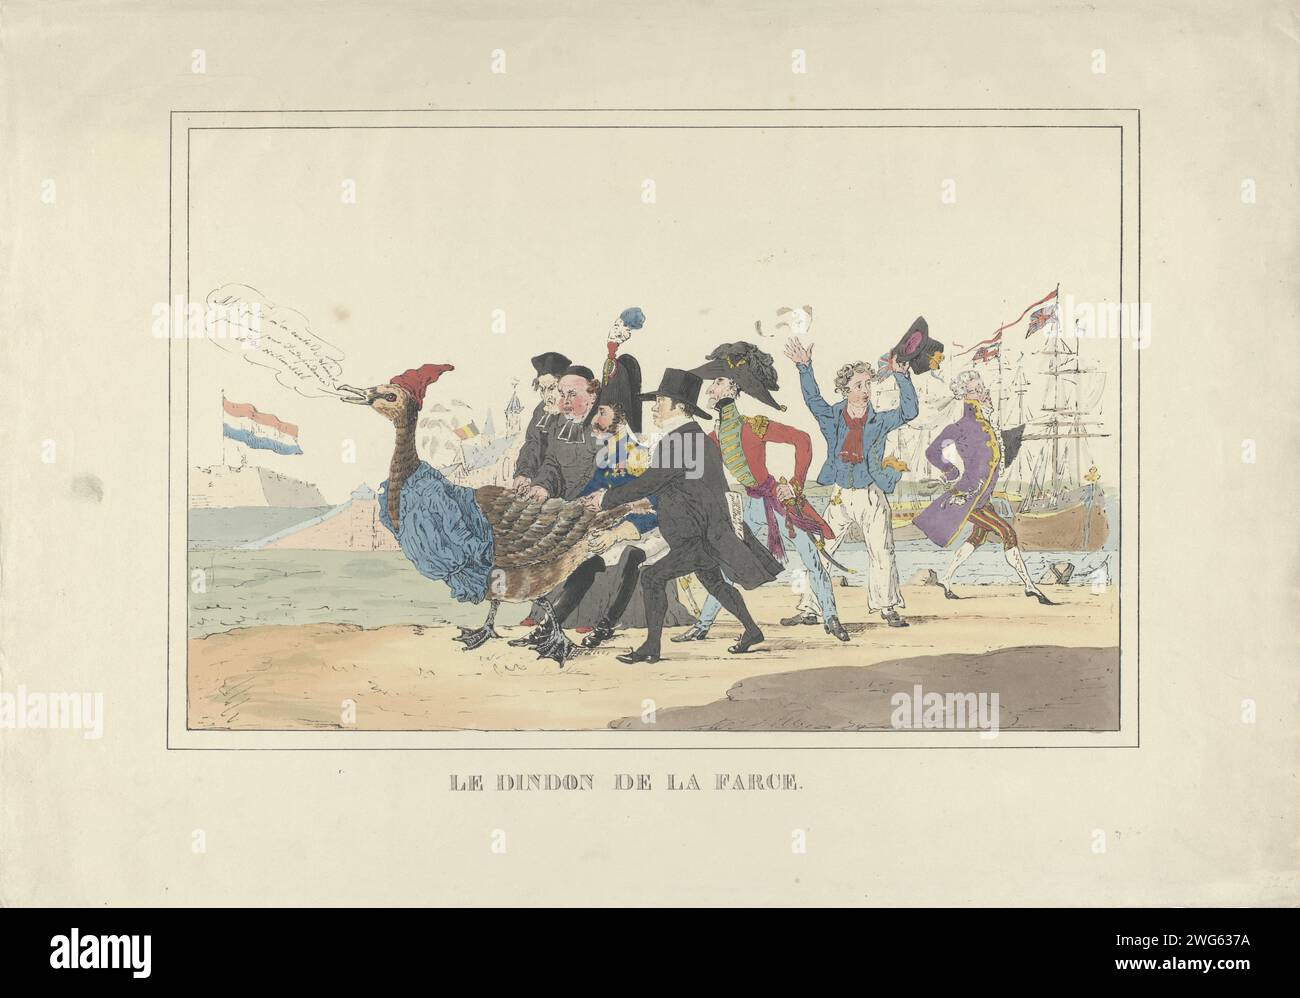 Belgium exploited by different countries, 1831, 1831 print Bartlepent with the Free Belgium presented as a goose in a blue Werkmanskiel and with Jacobijnenmuts, 1831. Two clergymen, a French and an English officer and a financier (Rothschild?) All try to pick all the goose at the same time. A Dutch sailor has already given up picking, on the right Surlet de Chokier is satisfied. In the background, the Dutch flag flies on the citadel of Antwerp, on the right British ships. Netherlands paper  water-birds: goose. cleaning fowl or small animals Citadel of Antwerp (19th century) Stock Photo